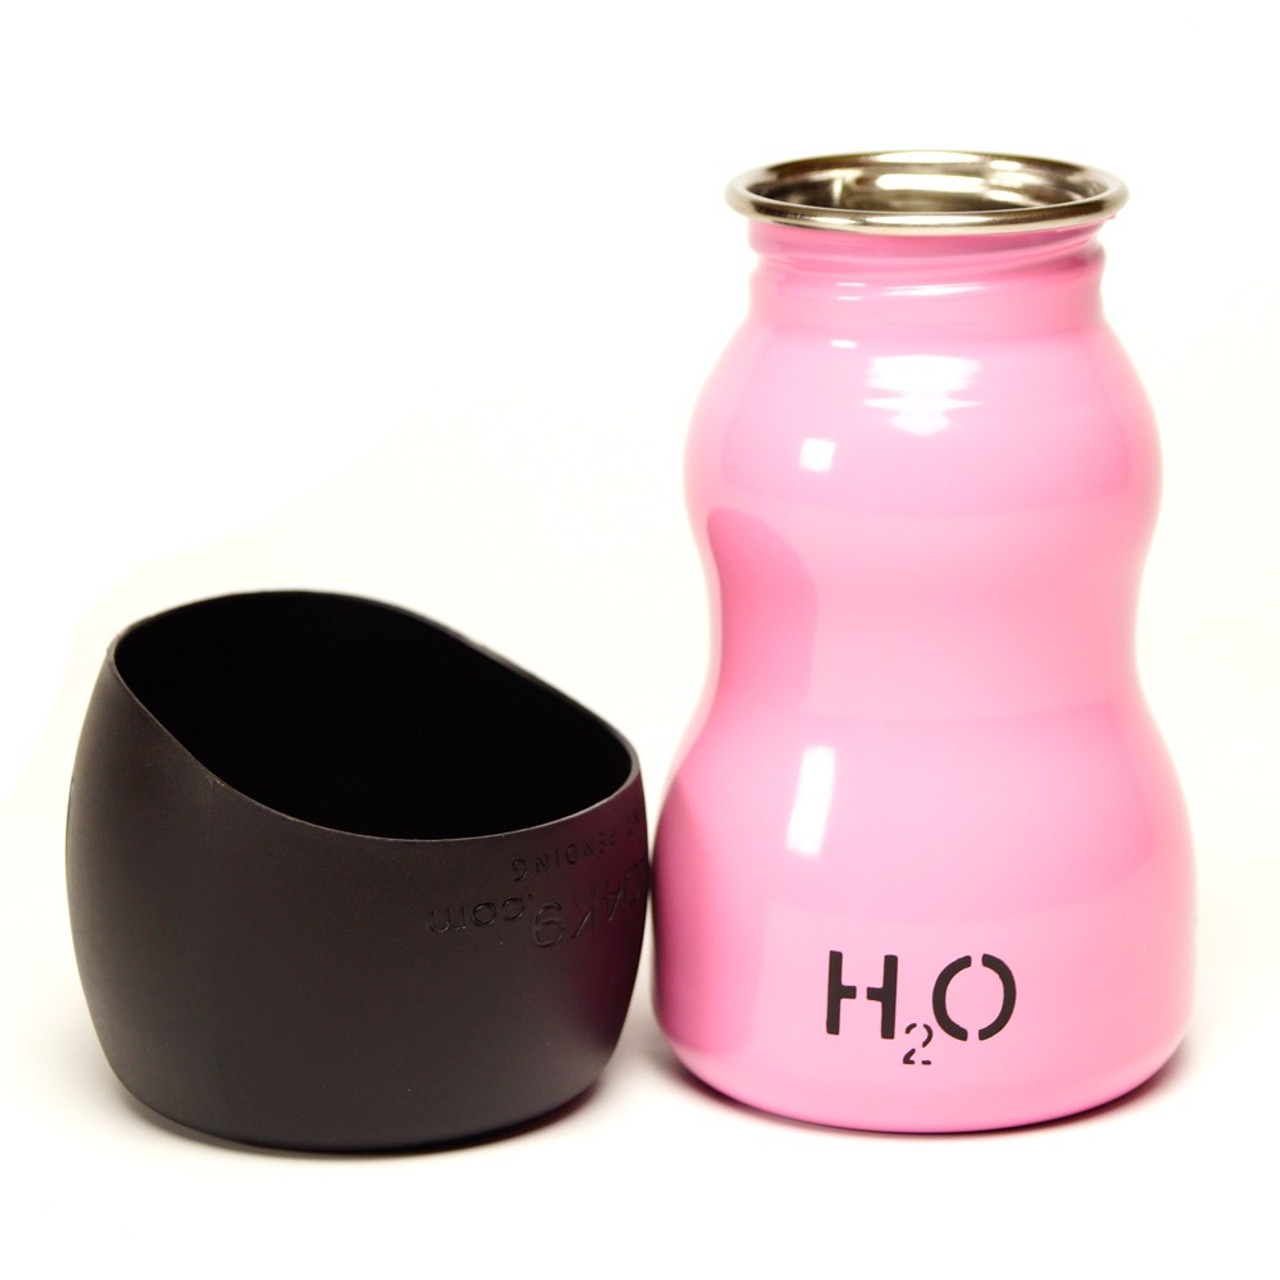 https://cdn11.bigcommerce.com/s-hnm2fcoh/images/stencil/1280x1280/products/3449/9513/water_bottle_pink__72085.1441842142.jpg?c=2